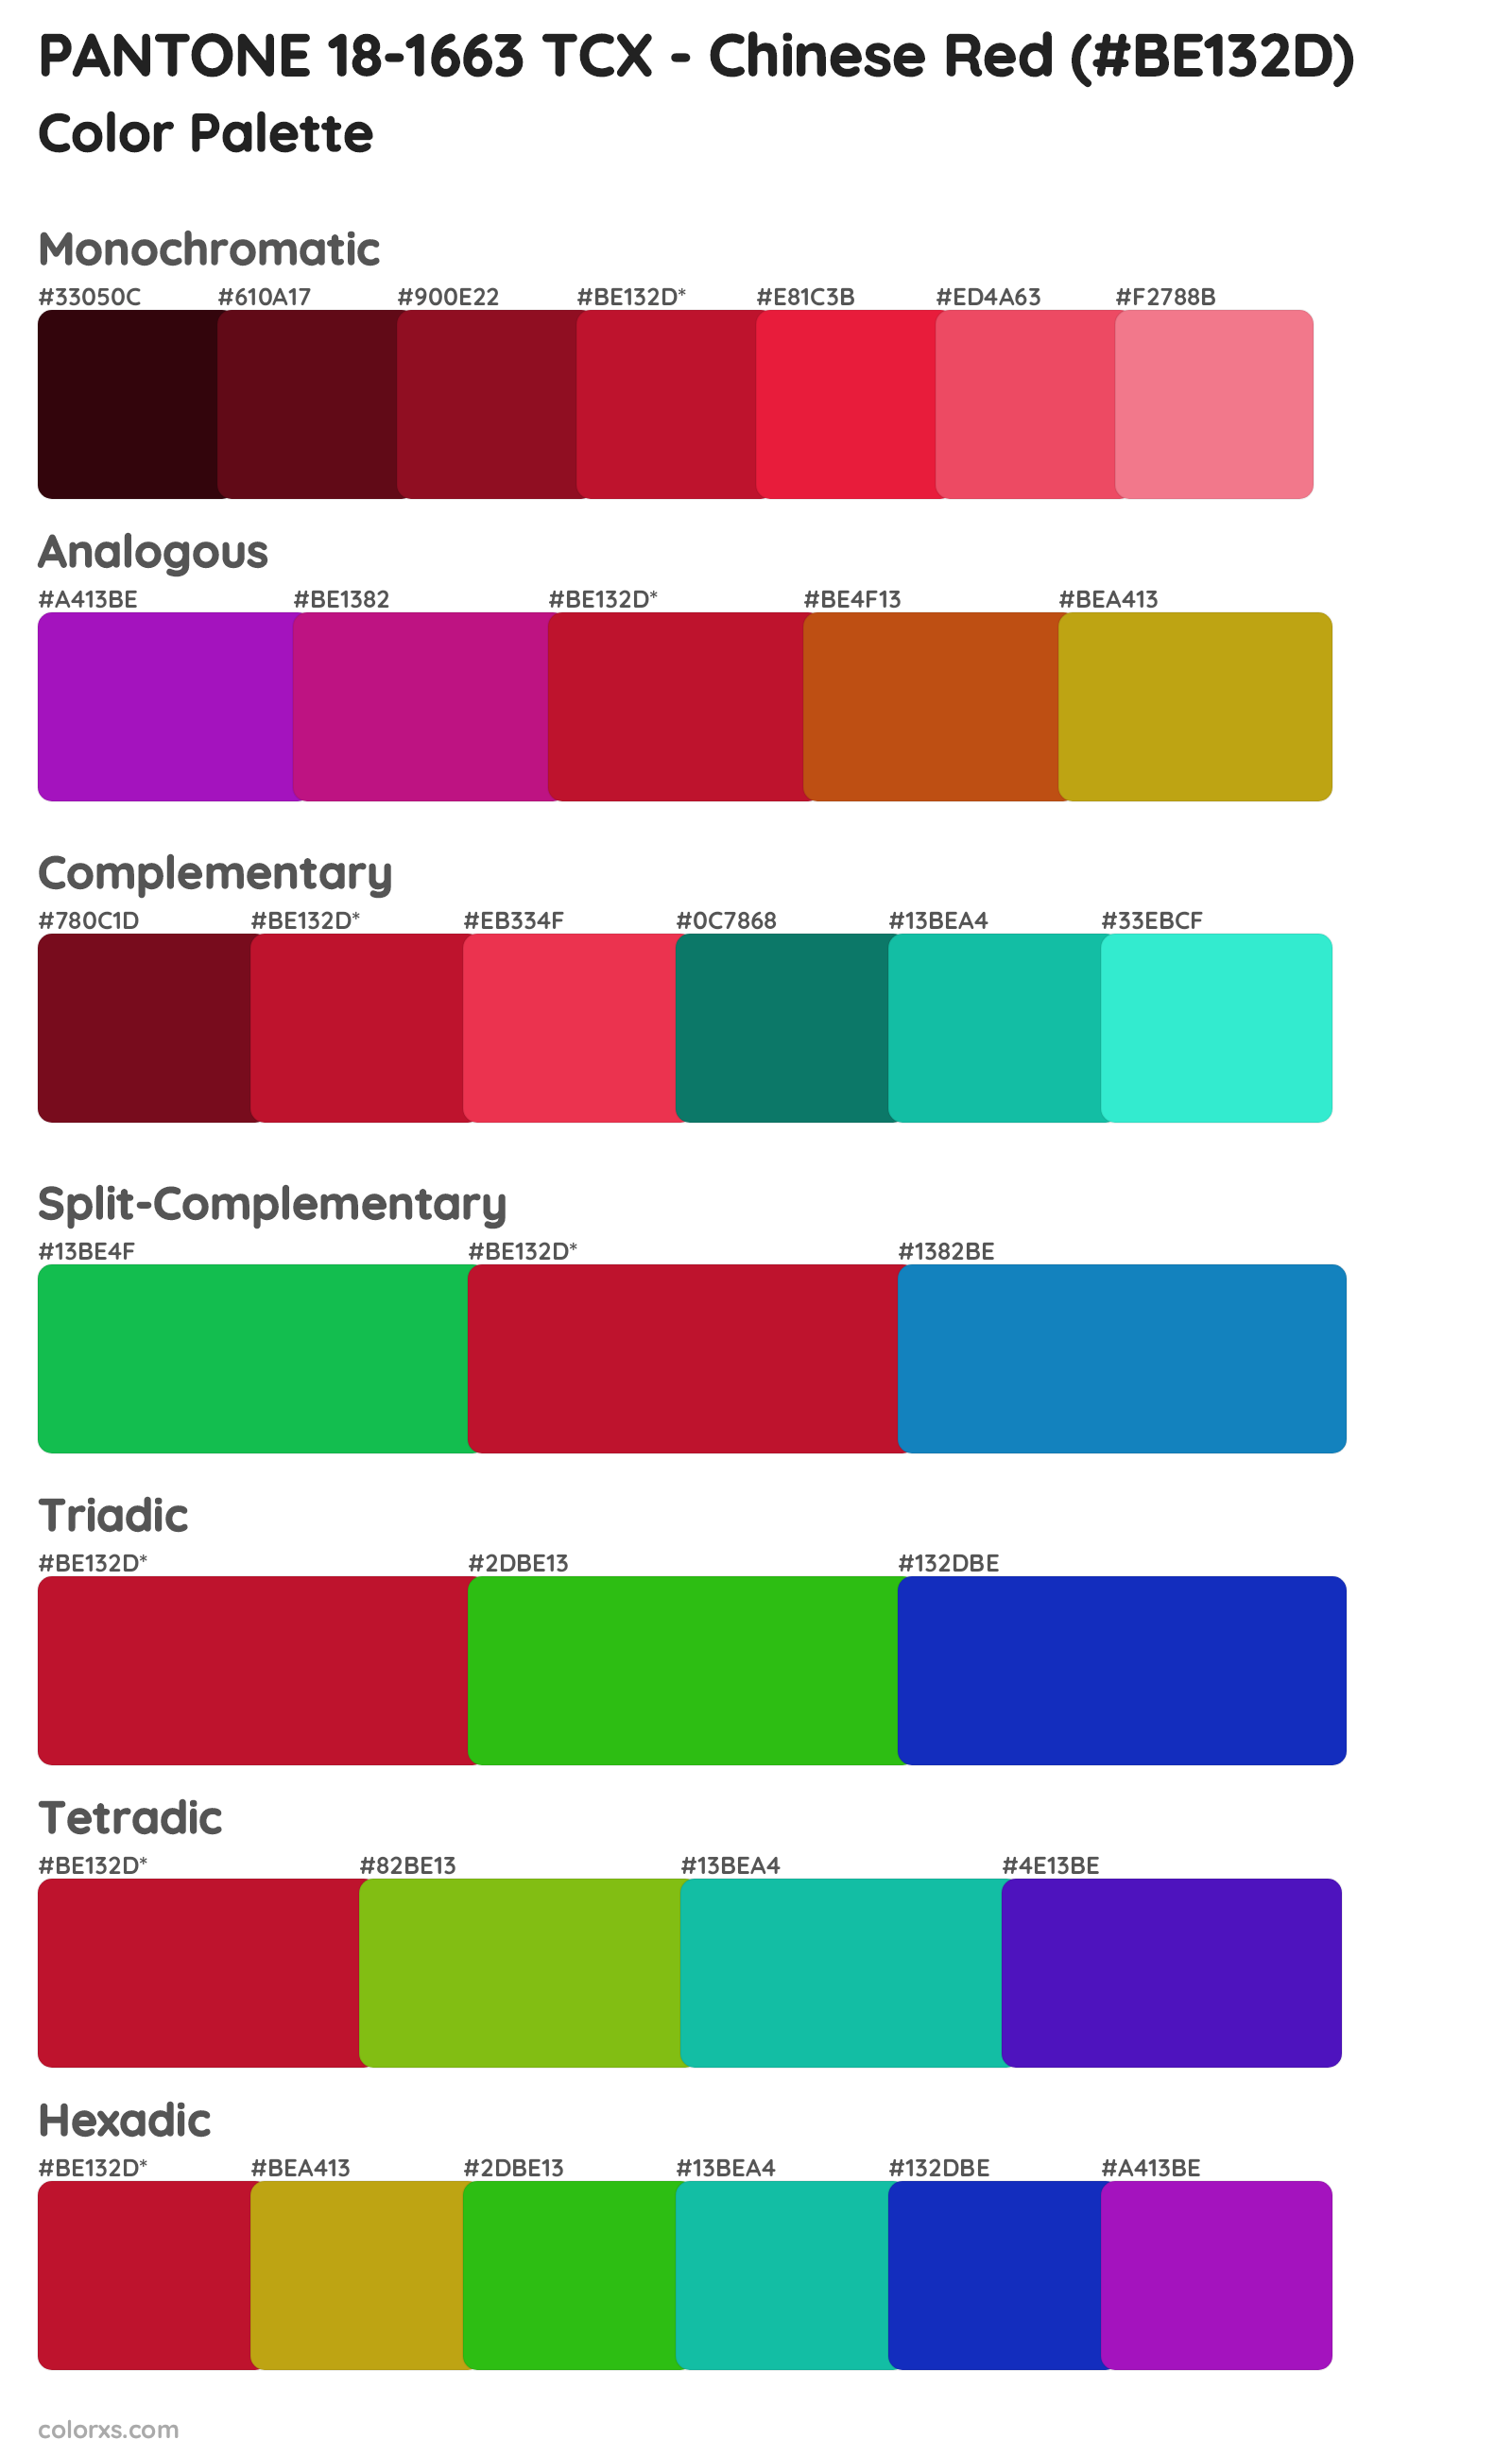 PANTONE 18-1663 TCX - Chinese Red Color Scheme Palettes